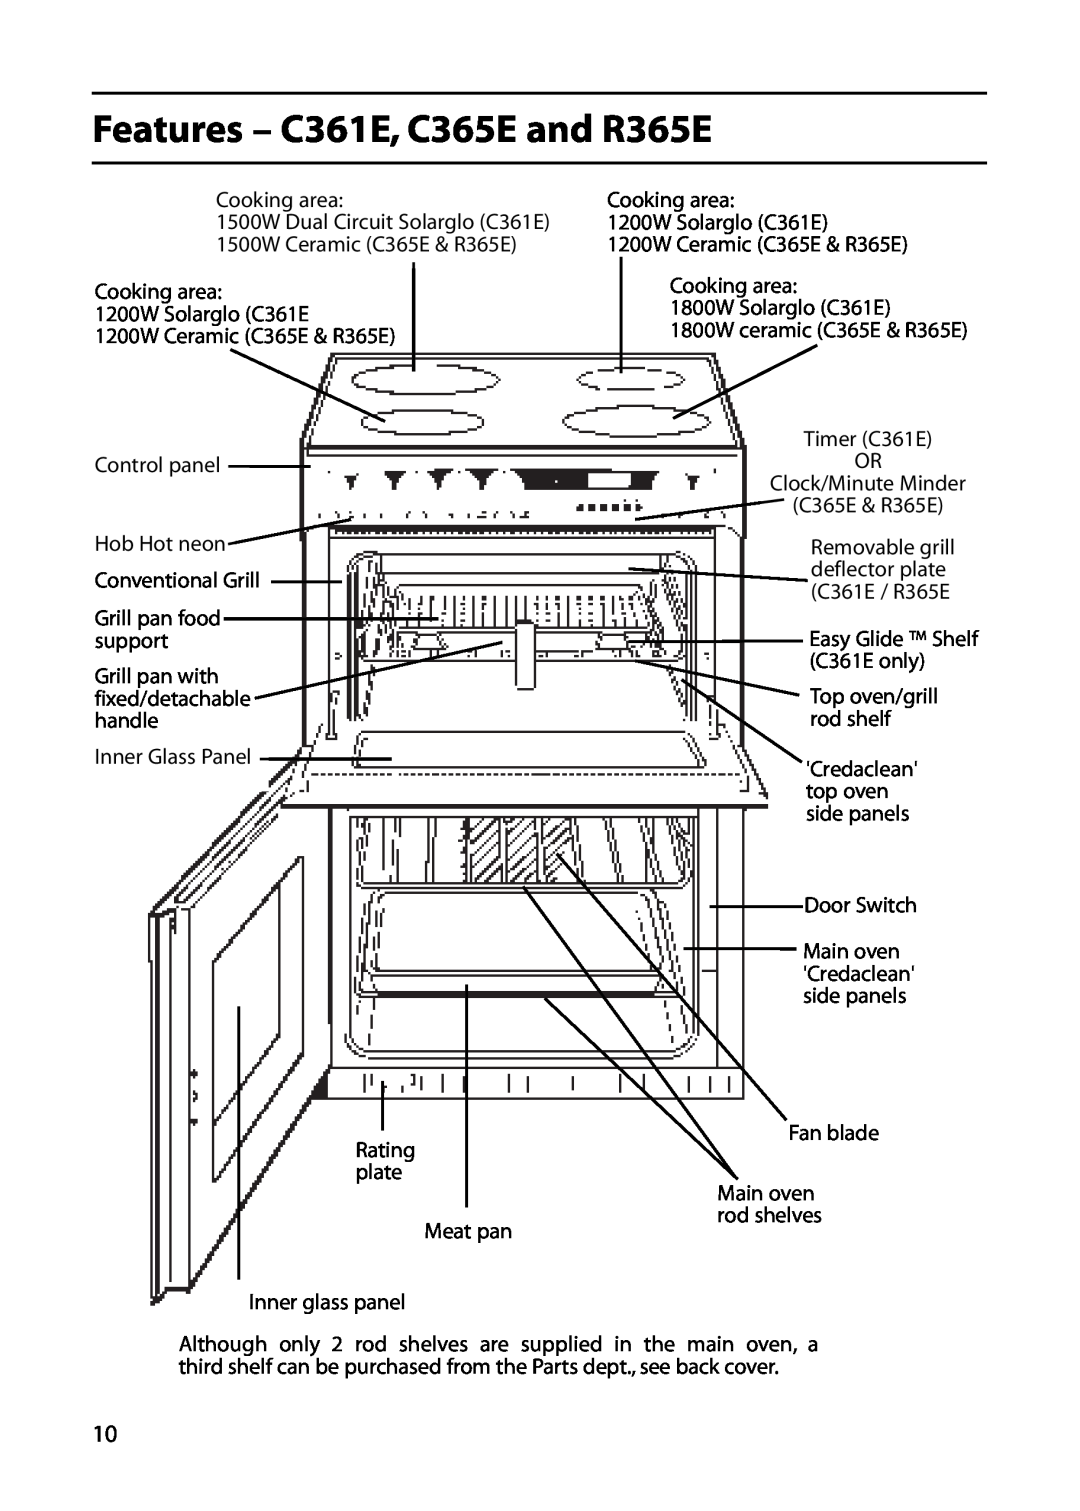 Creda C161E manual Features - C361E, C365E and R365E, Easy Glide Shelf C361E only, Credaclean top oven side panels 